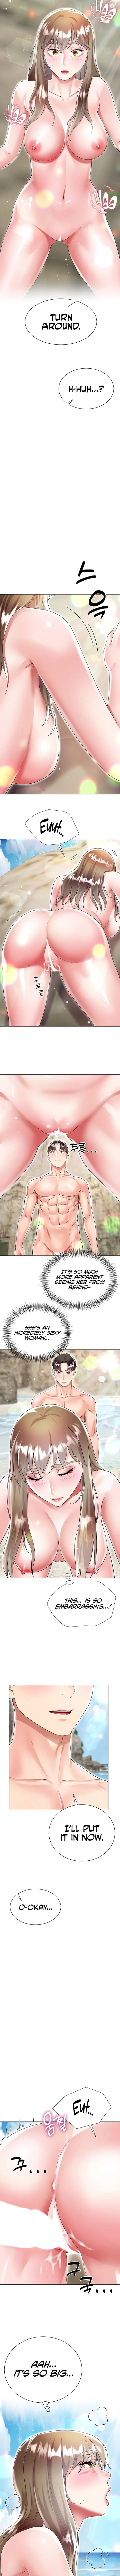 my-sister-in-laws-skirt-chap-39-3